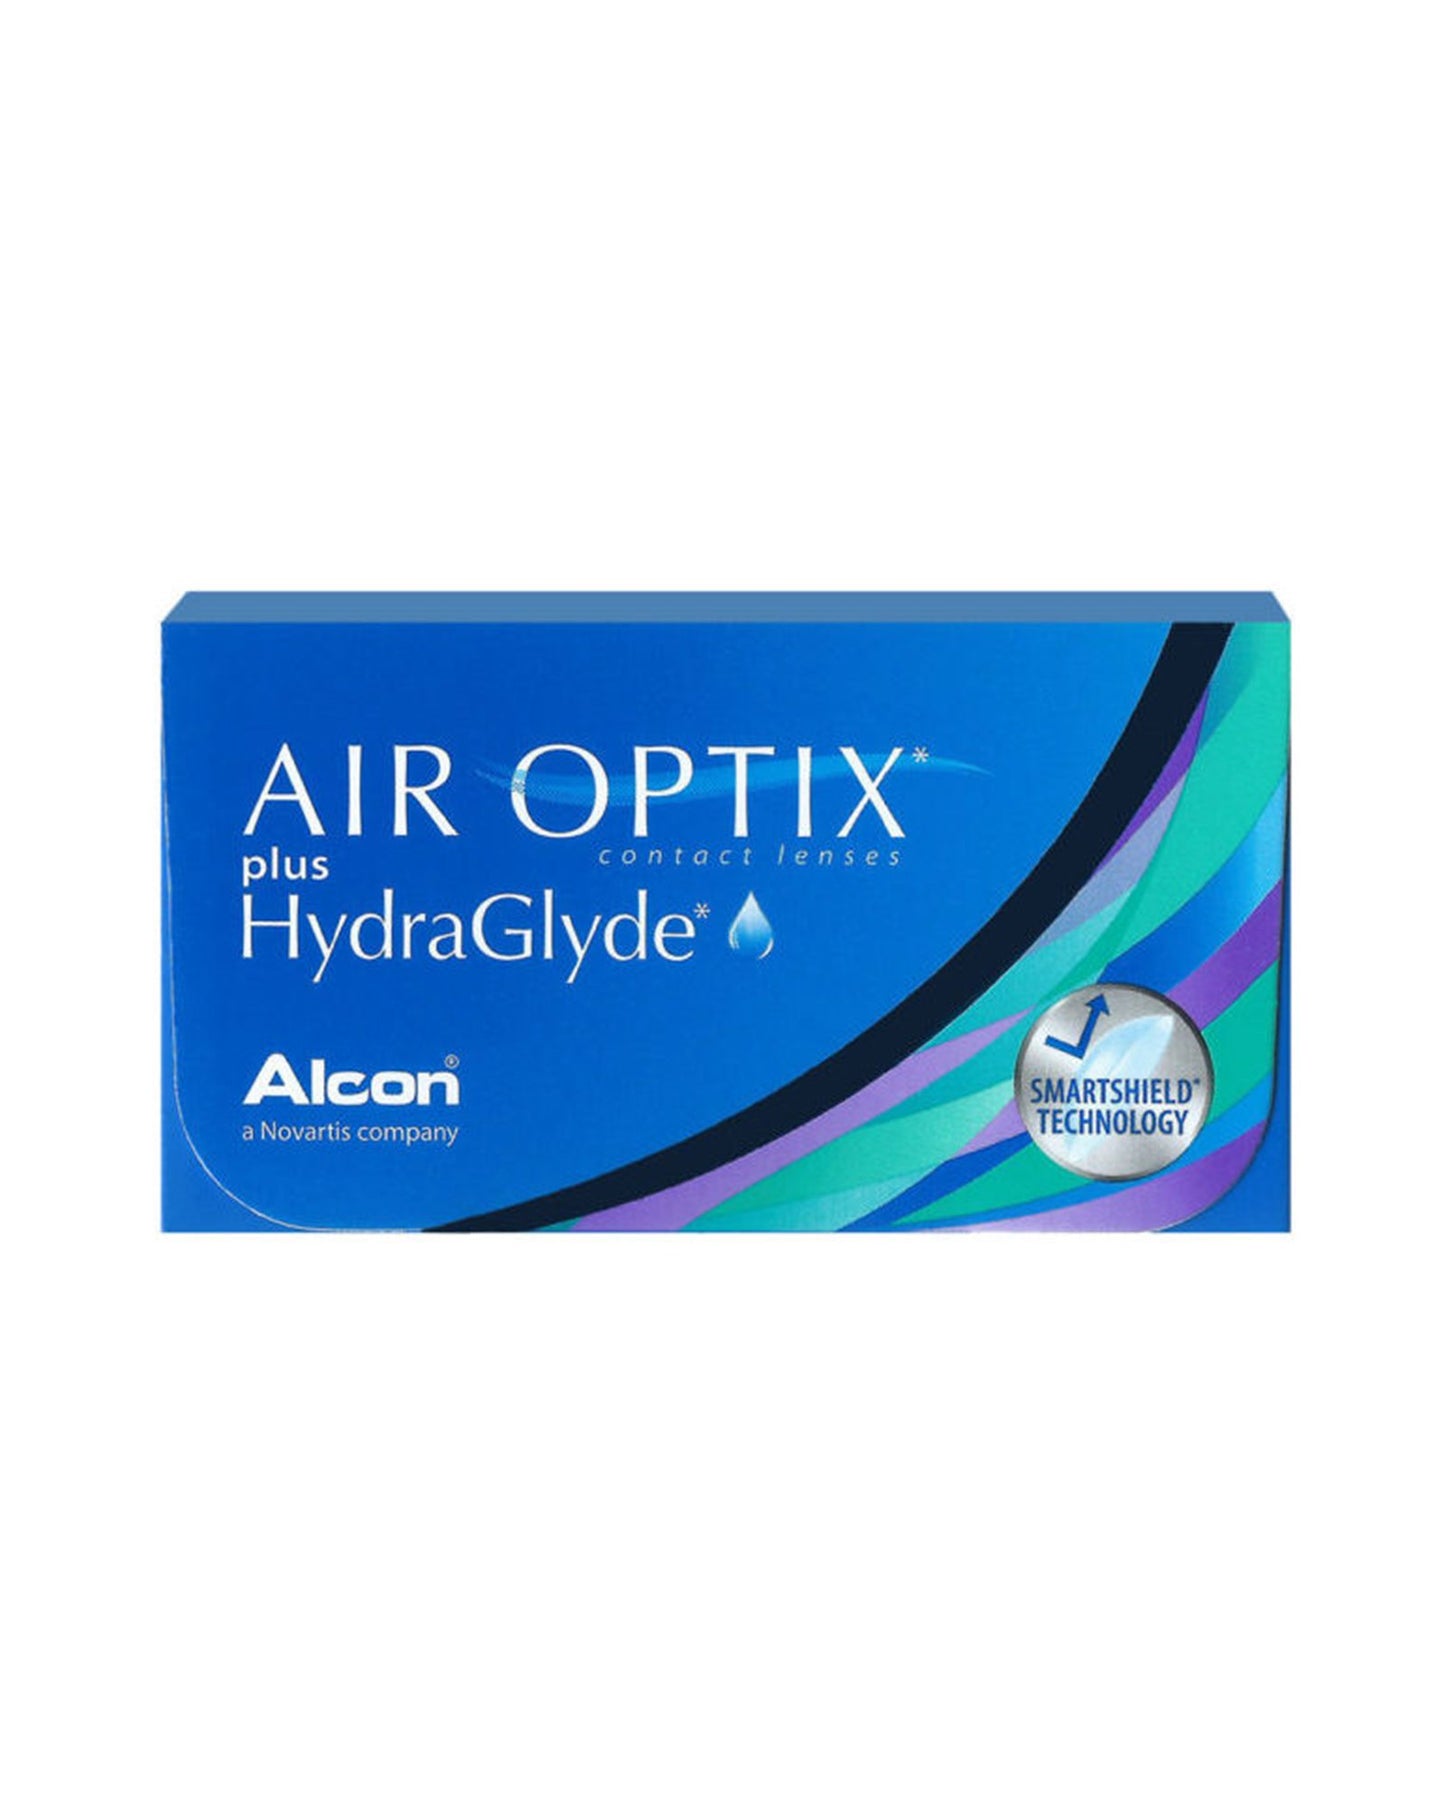 AIR OPTIX® Hydraglyde - Eleven Eleven Contact Lens and Vision Care Experts